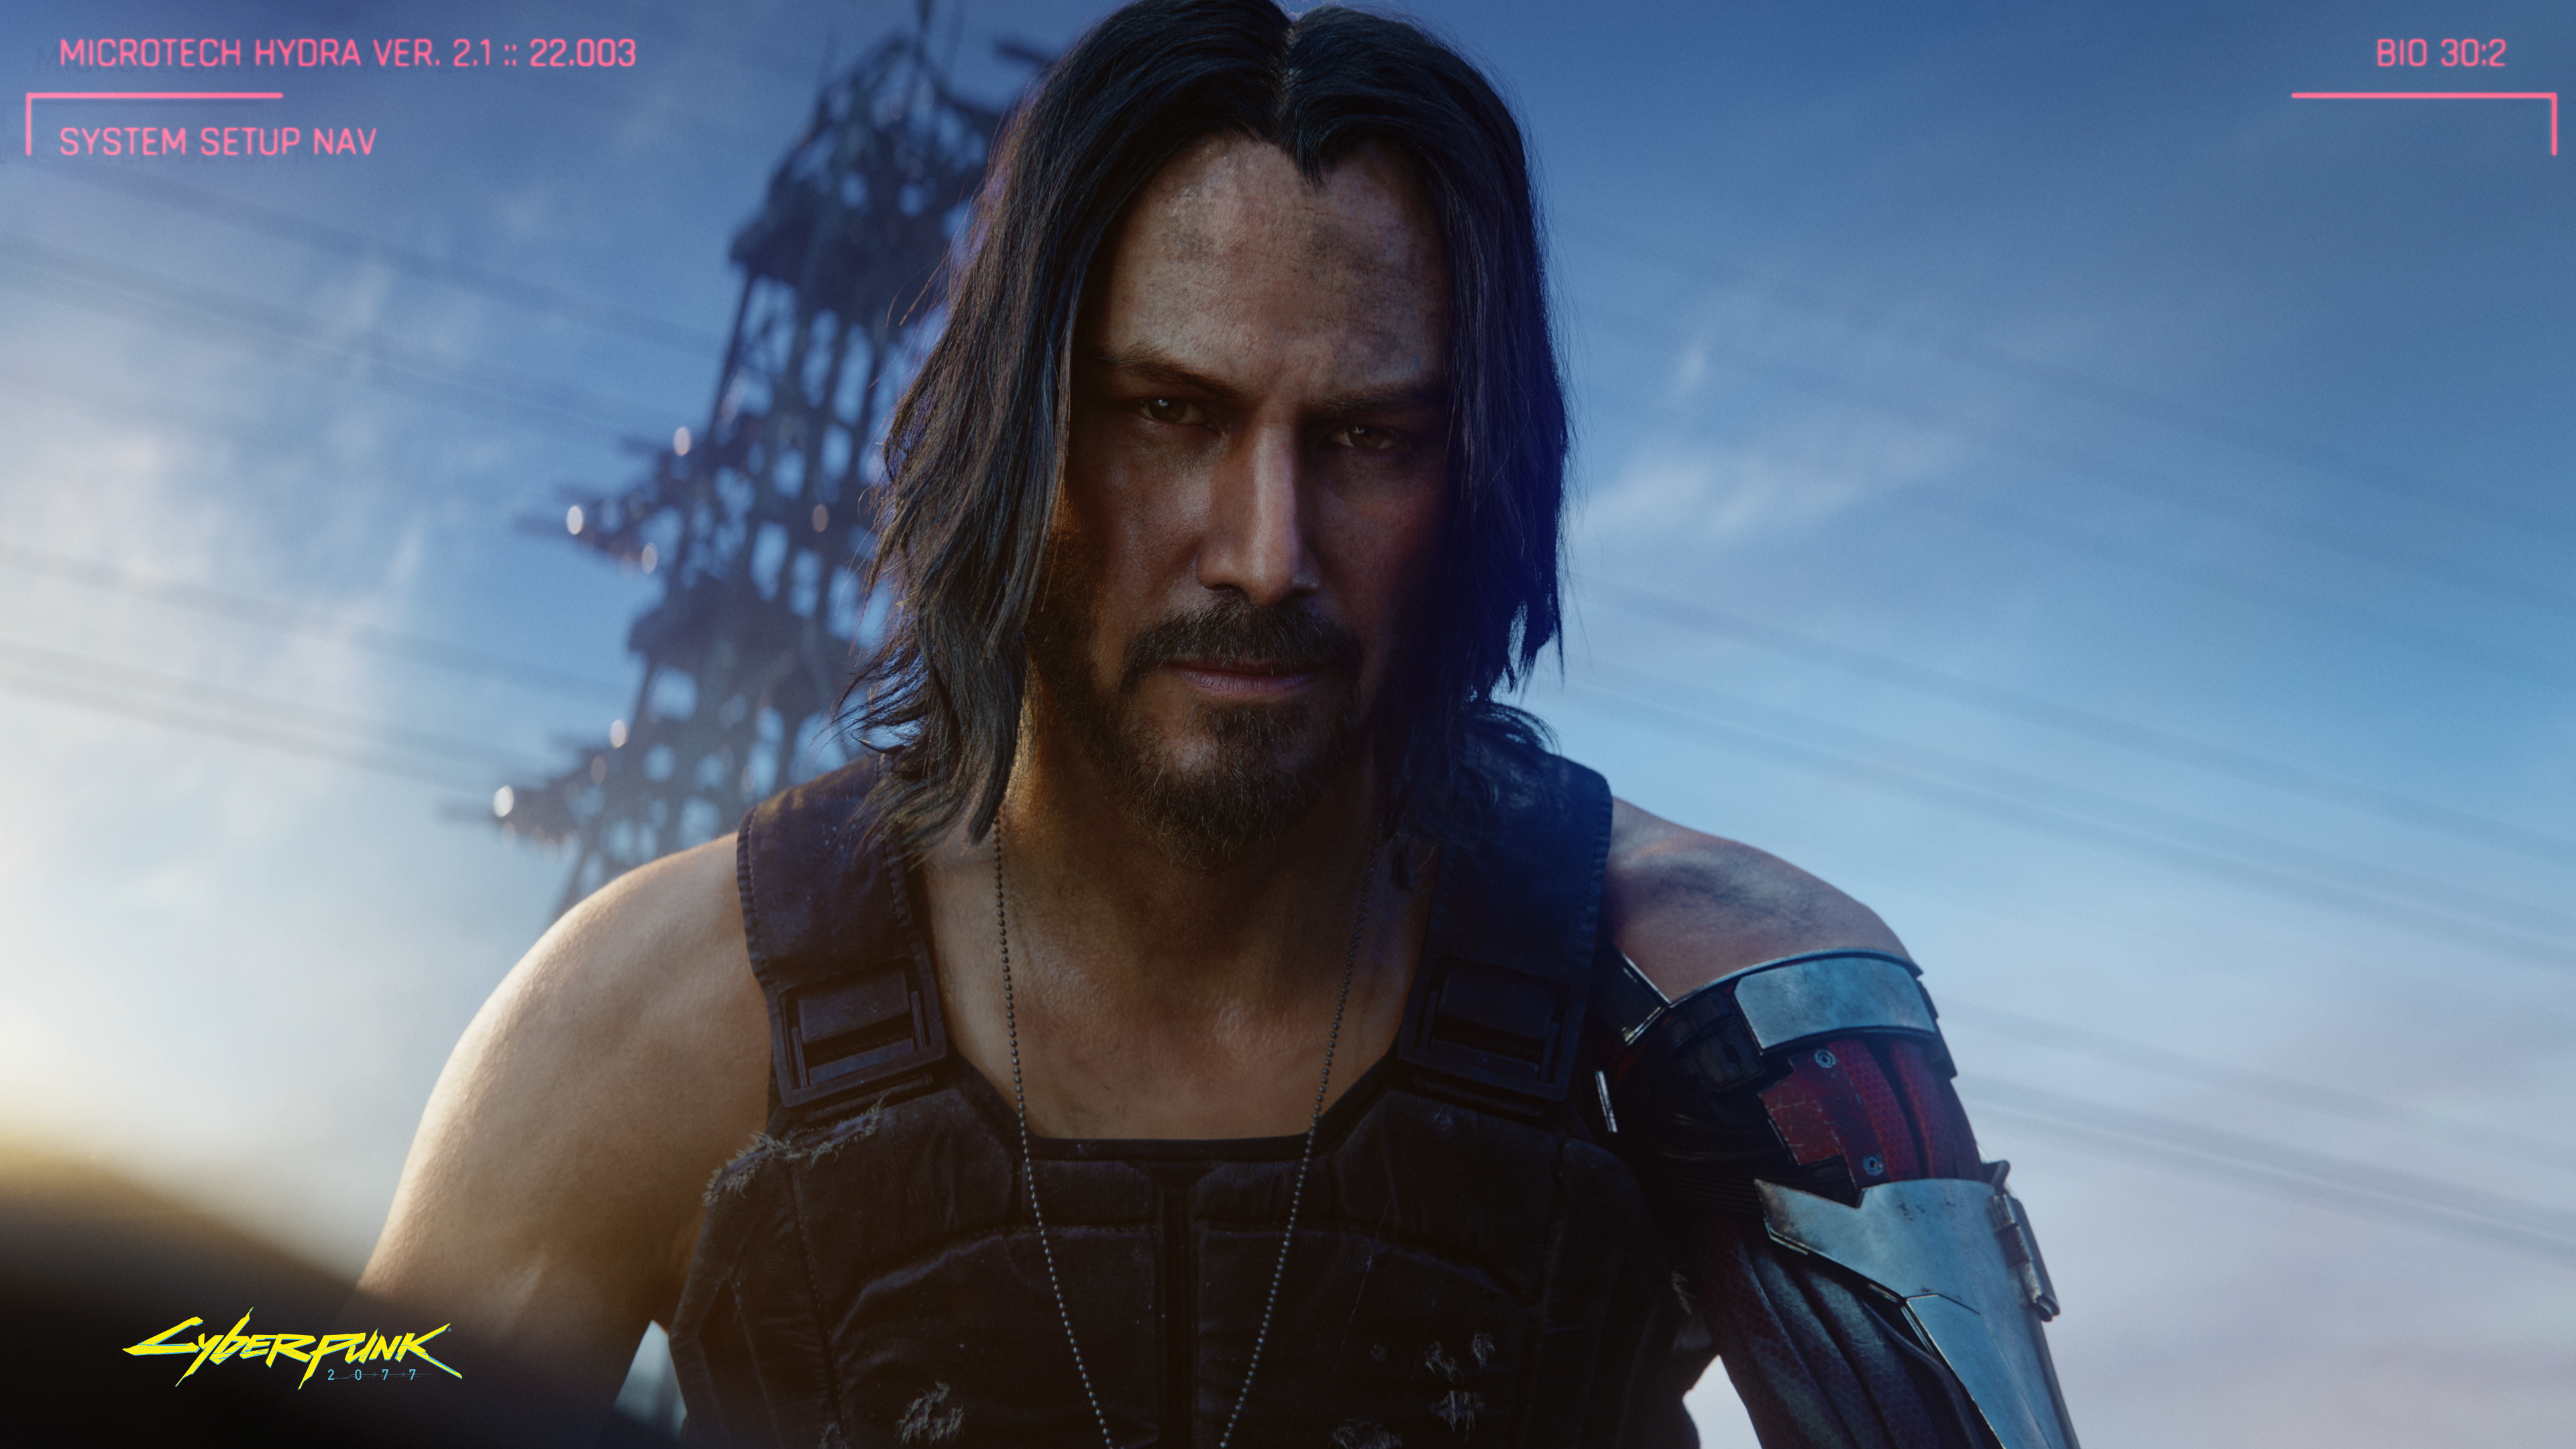 General 3840x2160 Cyberpunk 2077 screen shot Keanu Reeves video games Johnny Silverhand video game characters actor CD Projekt RED